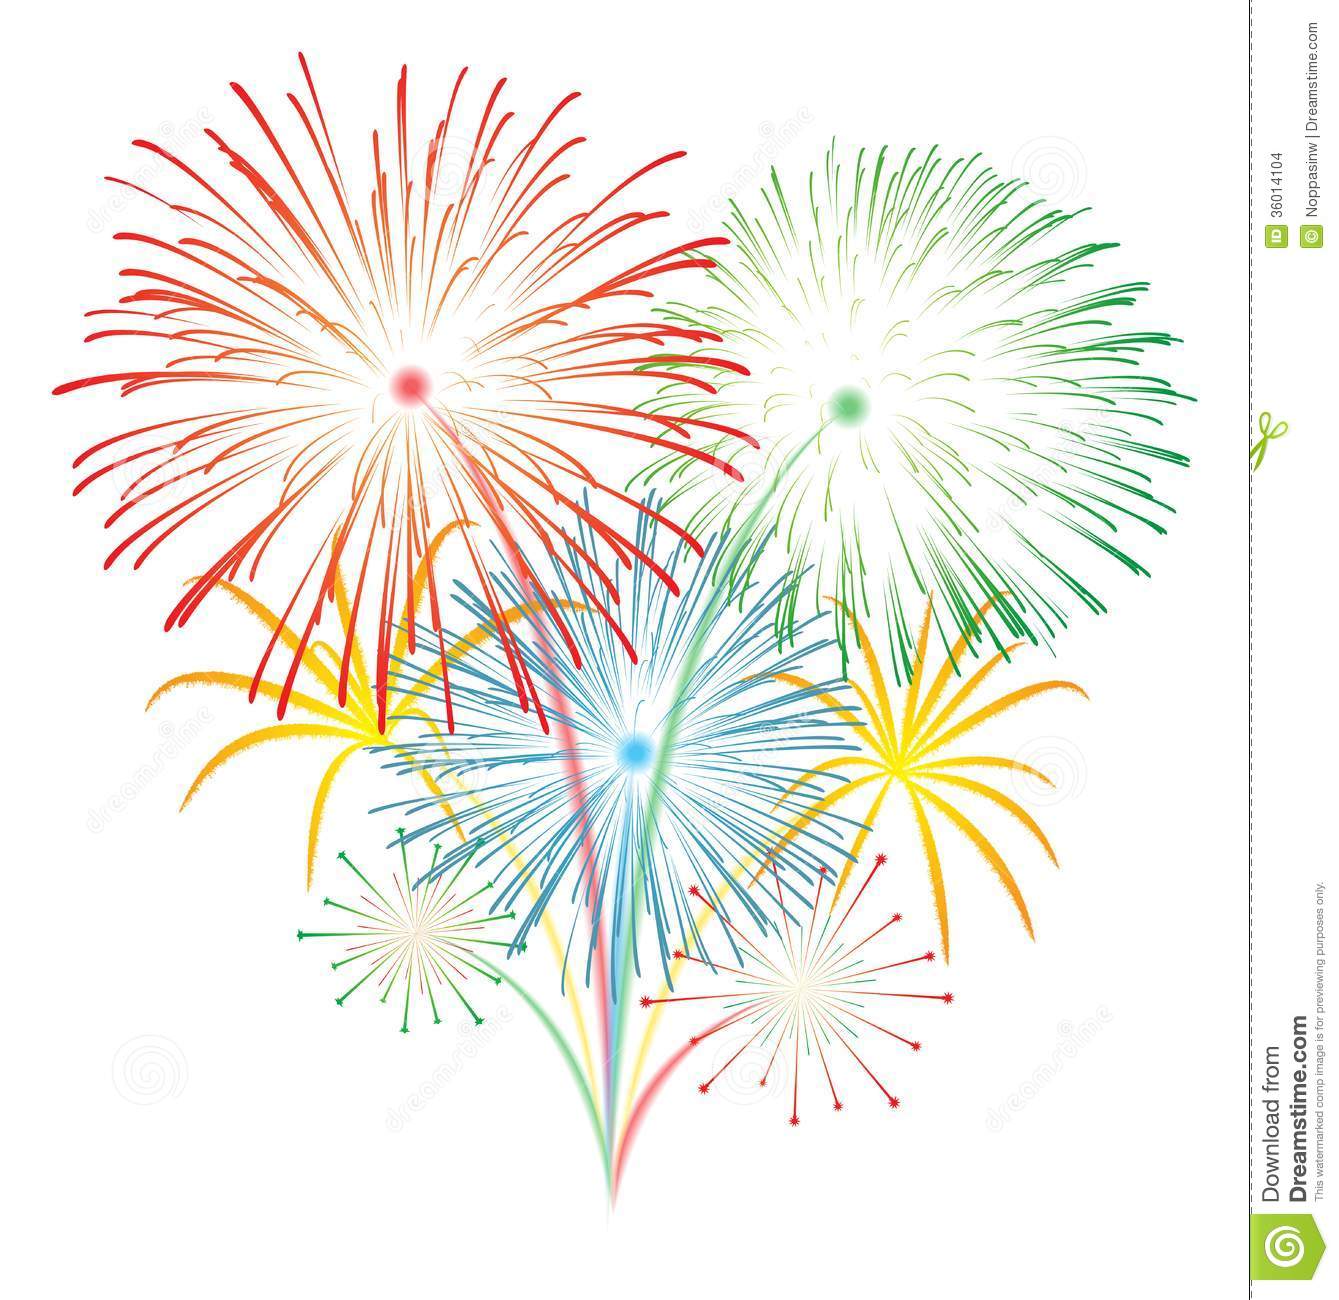 Fireworks Vector Stock Images   Image  36014104